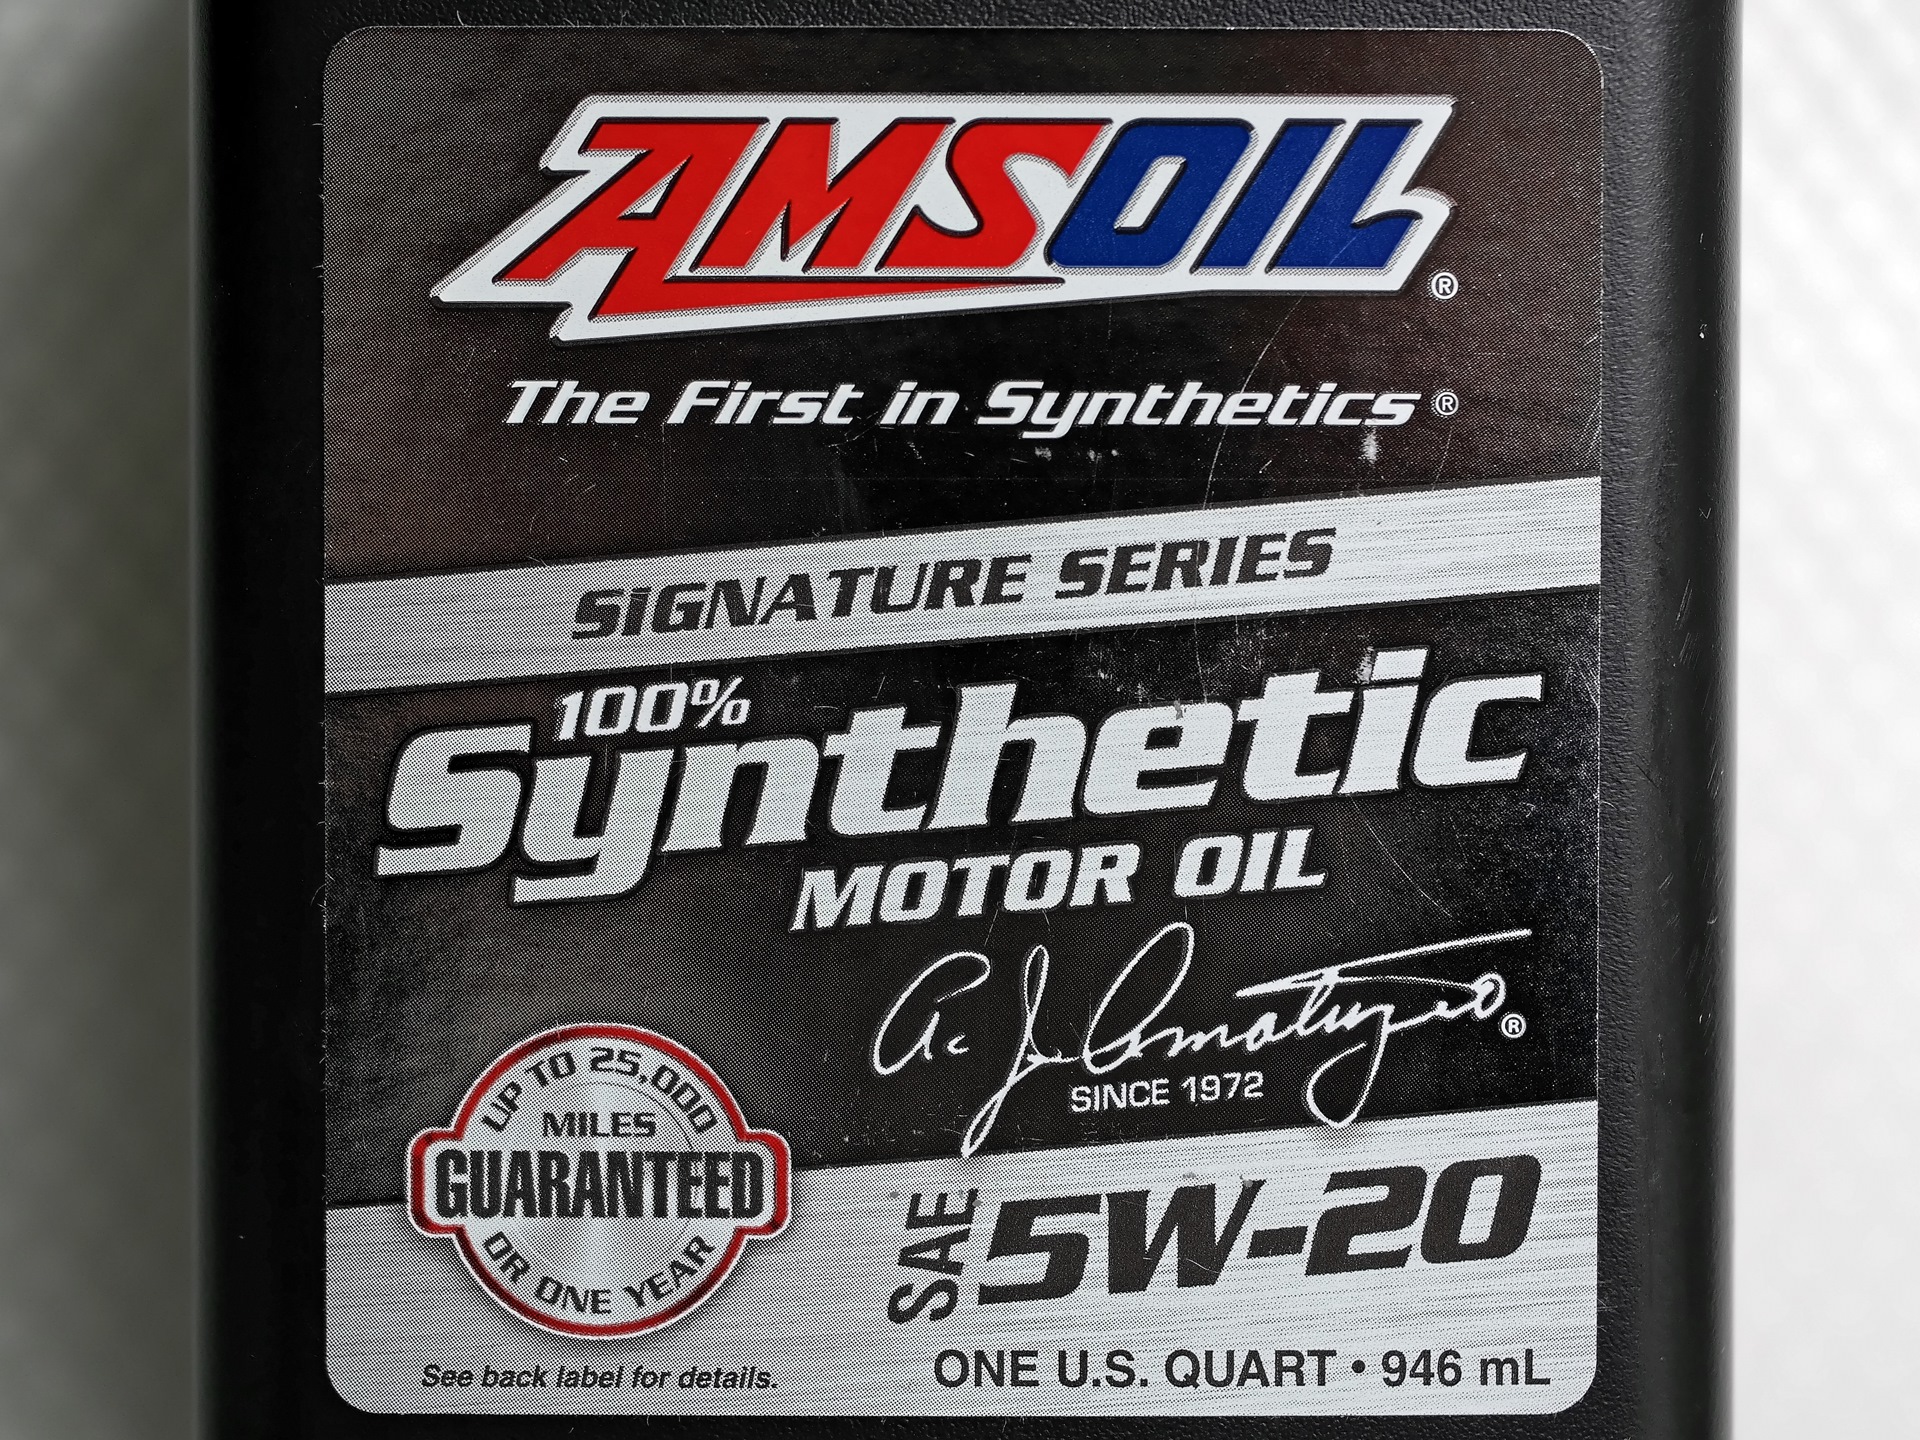 Amsoil signature series synthetic. AMSOIL 5w20. AMSOIL 5w20 артикул. Аmsoil Signature Series 100% Synthetic 5w-30. AMSOIL Signature Series Synthetic Motor Oil 5w-30.